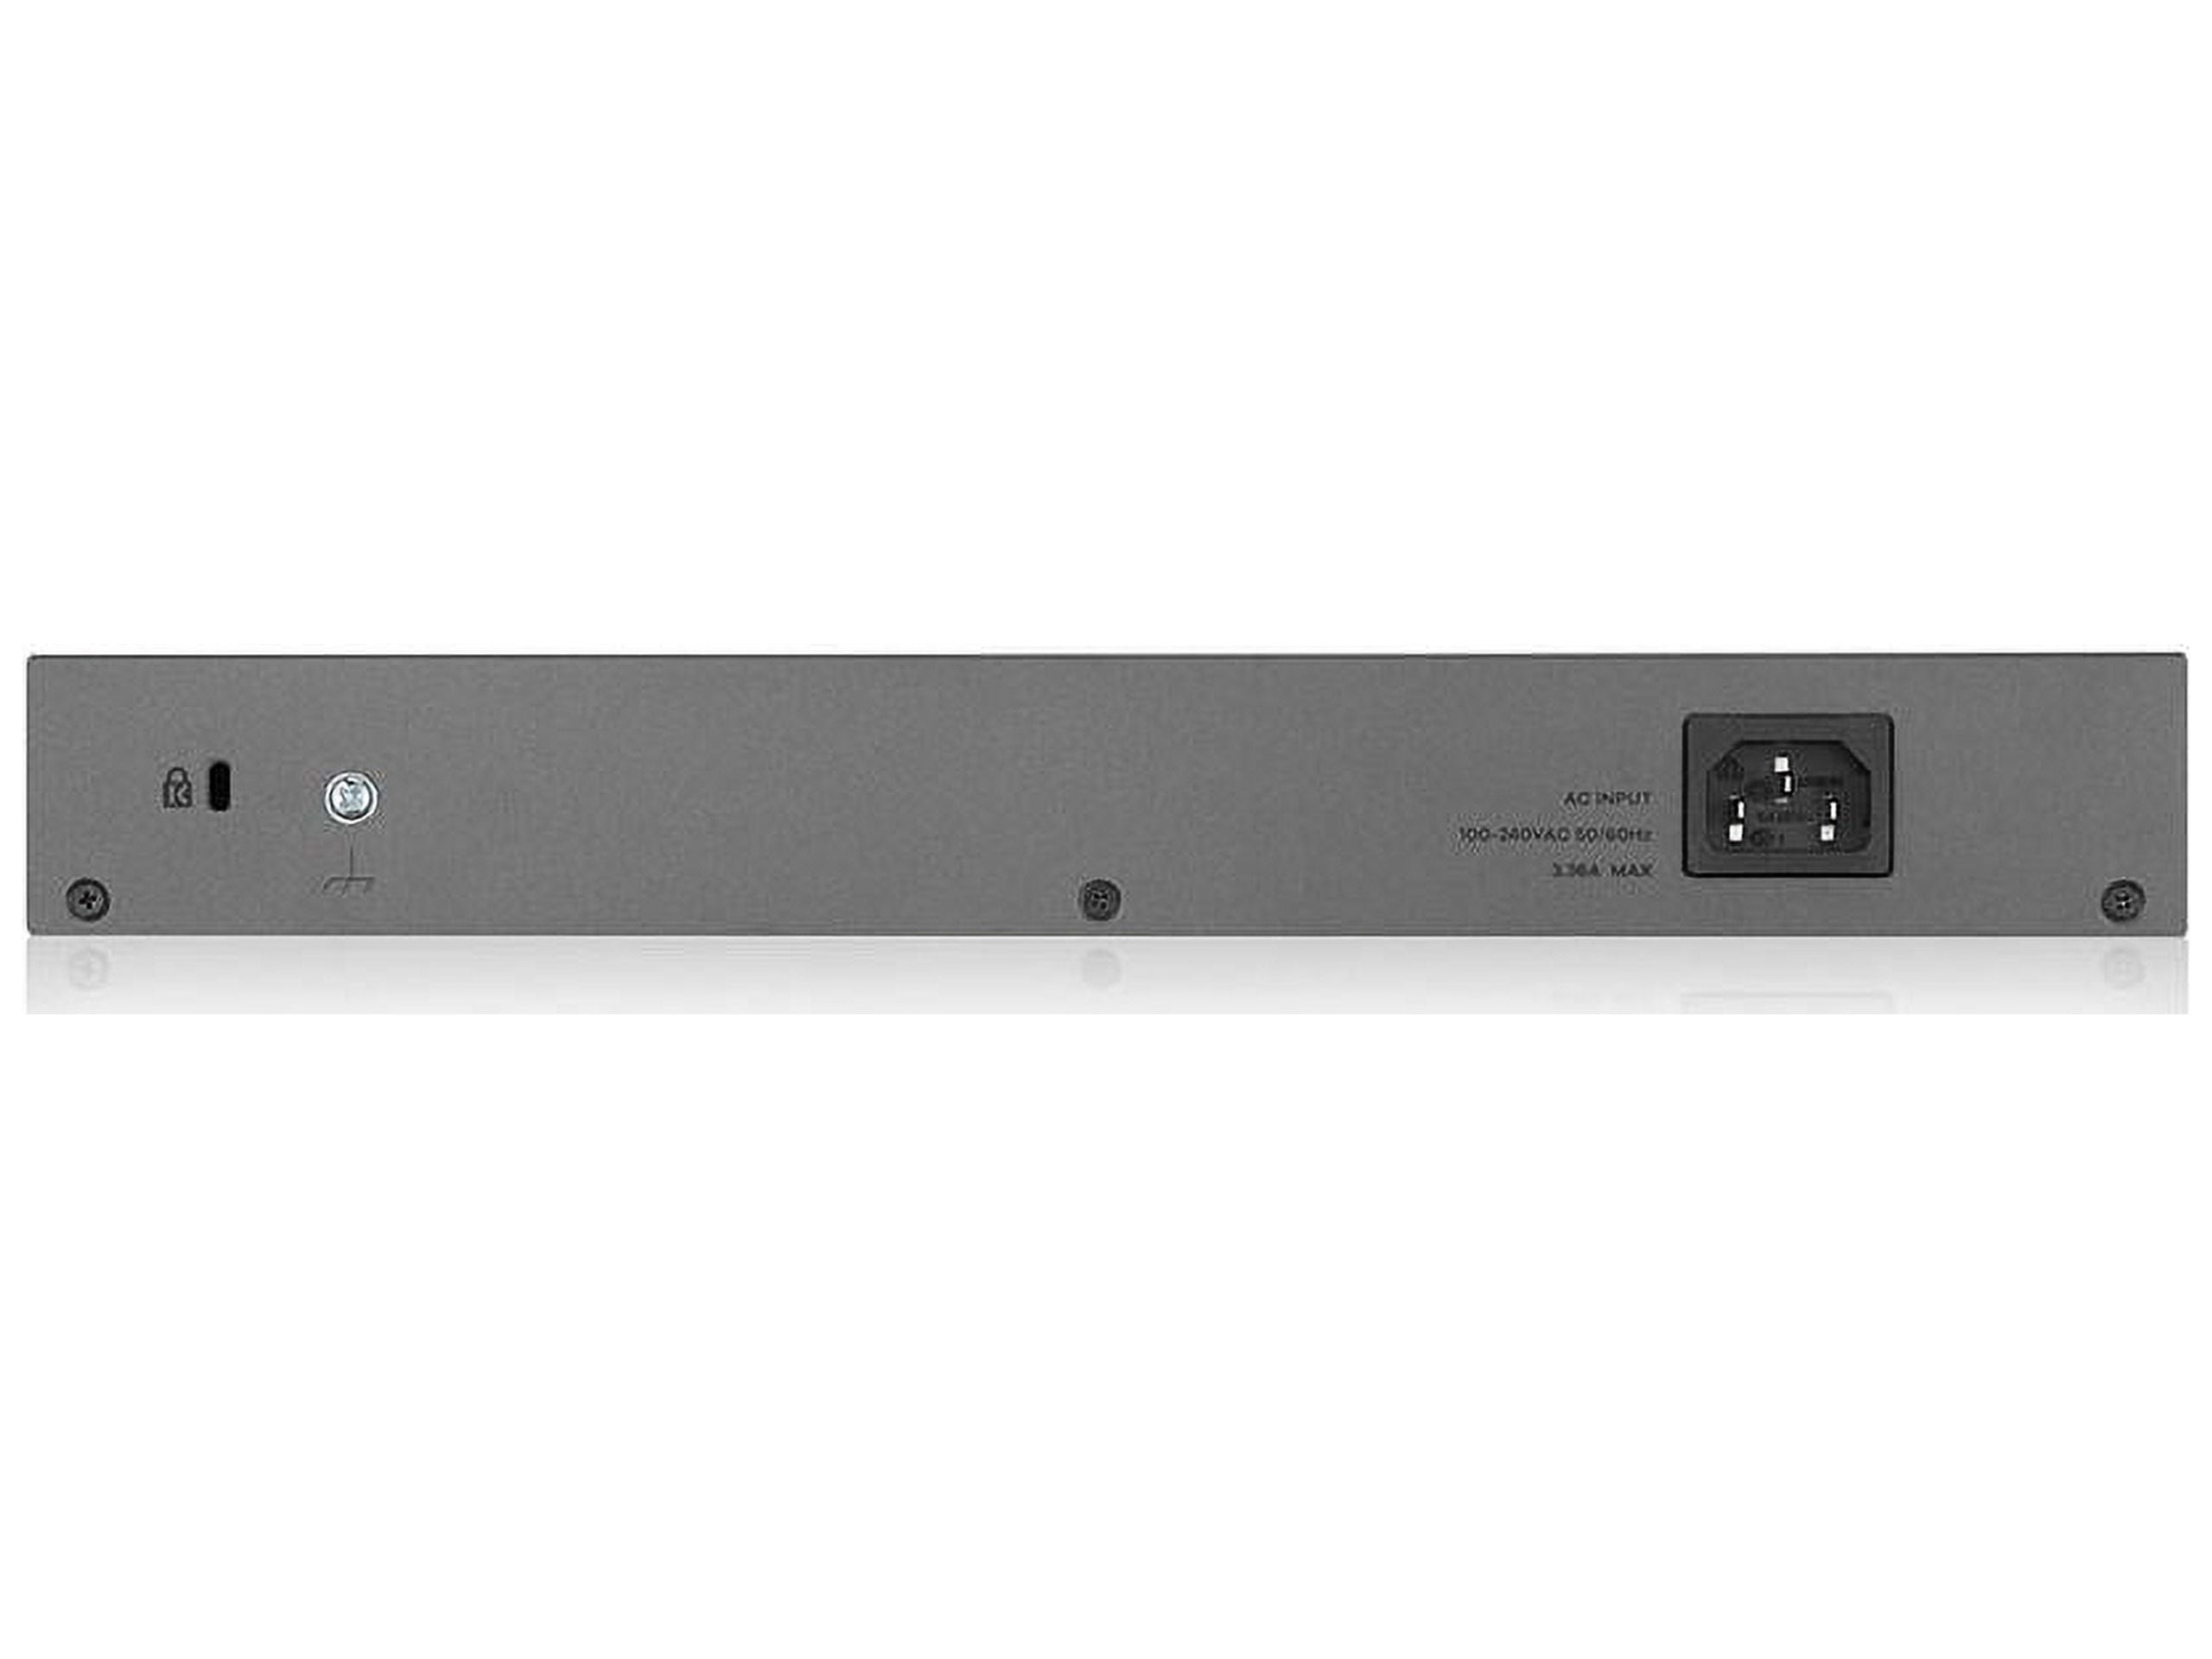 Picture of Zyxel GS1350-18HP 16-Port Gigabit PoE Plus Ethernet Switch